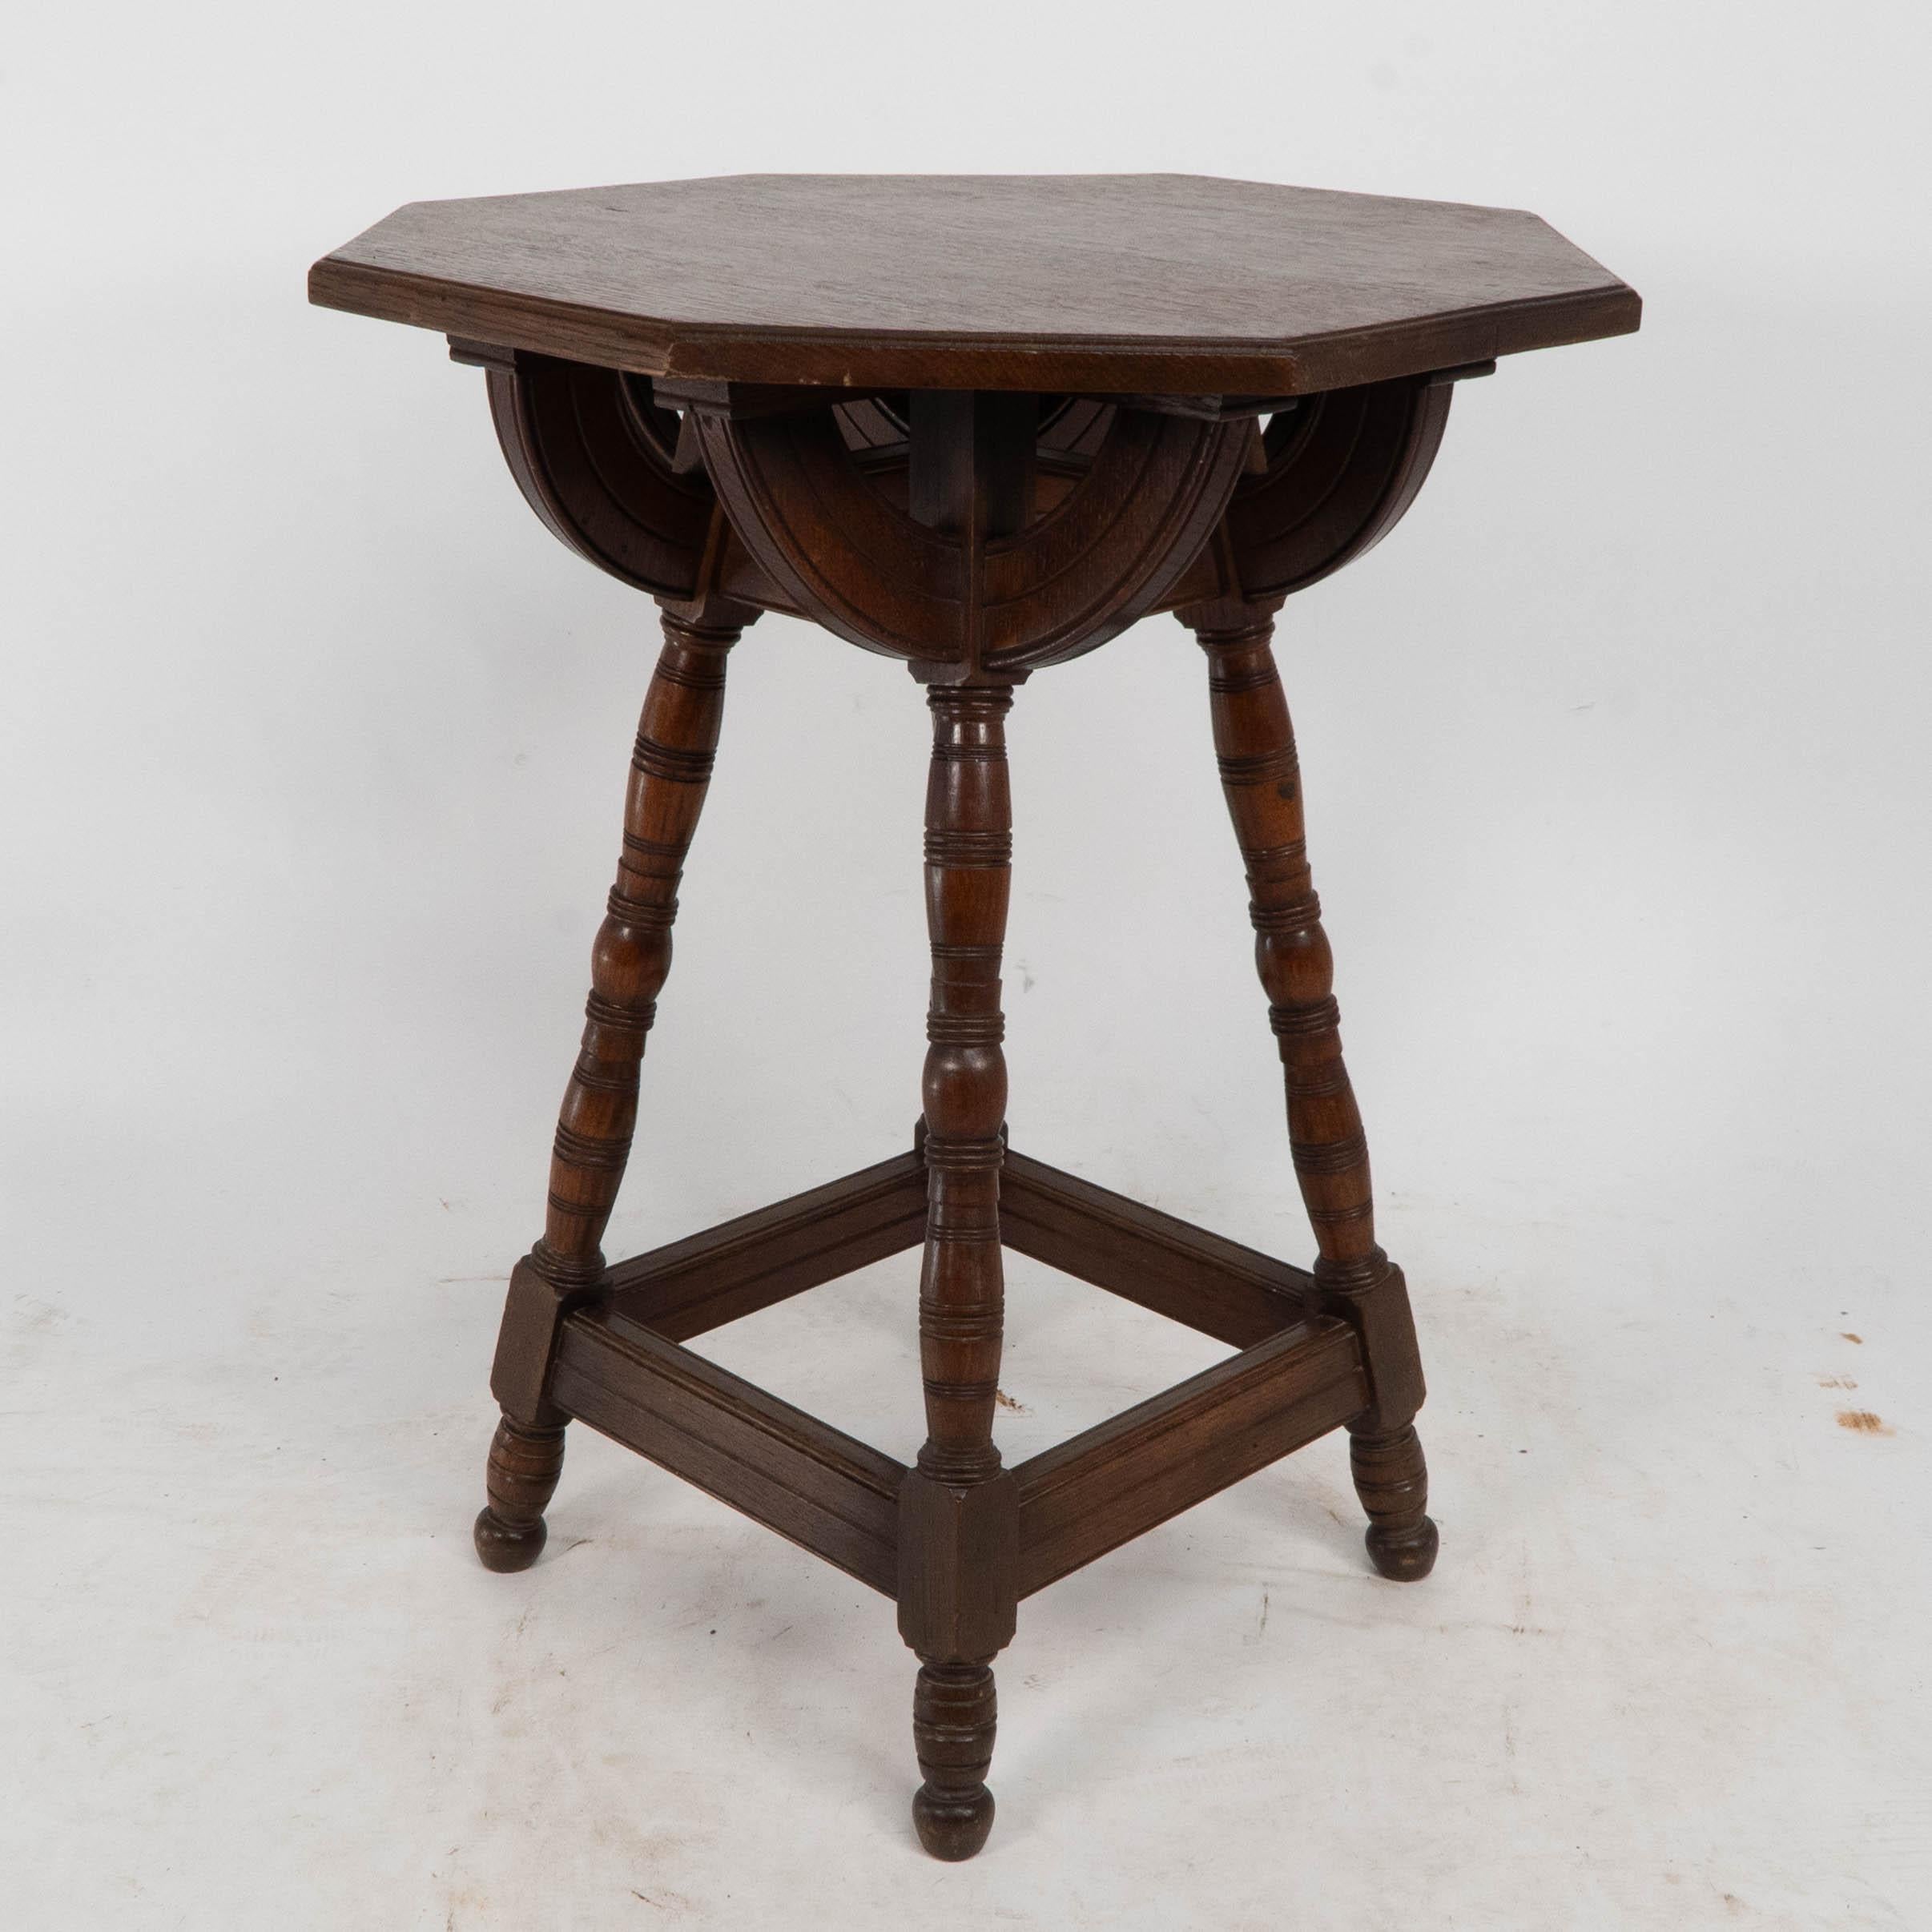 Mid-19th Century Collier and Plucknett. A rare Gothic Revival oak side table For Sale